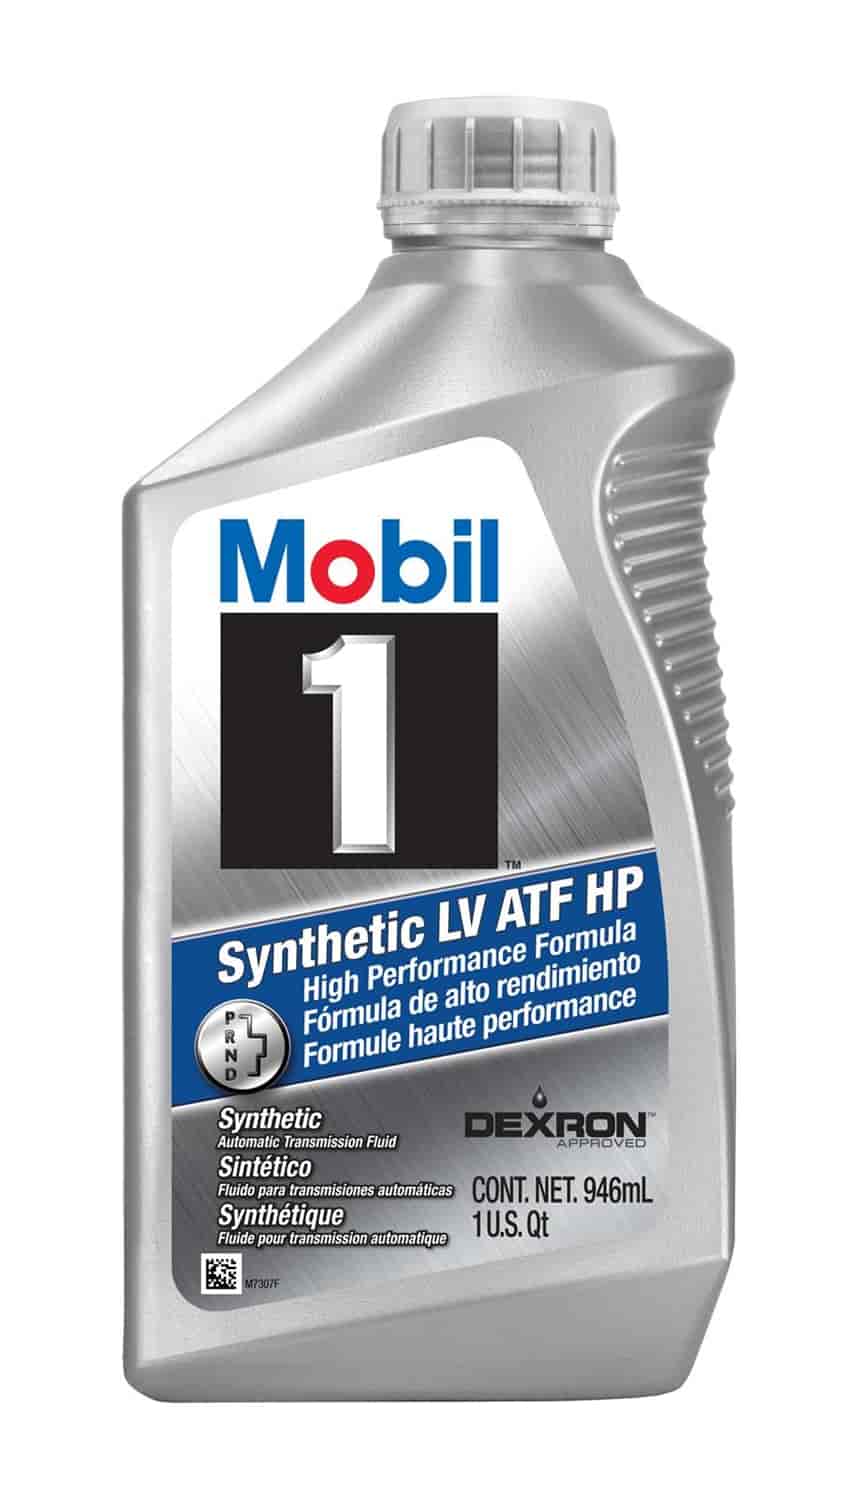 Mobil 1 124715: Synthetic LV ATF HP Case - JEGS